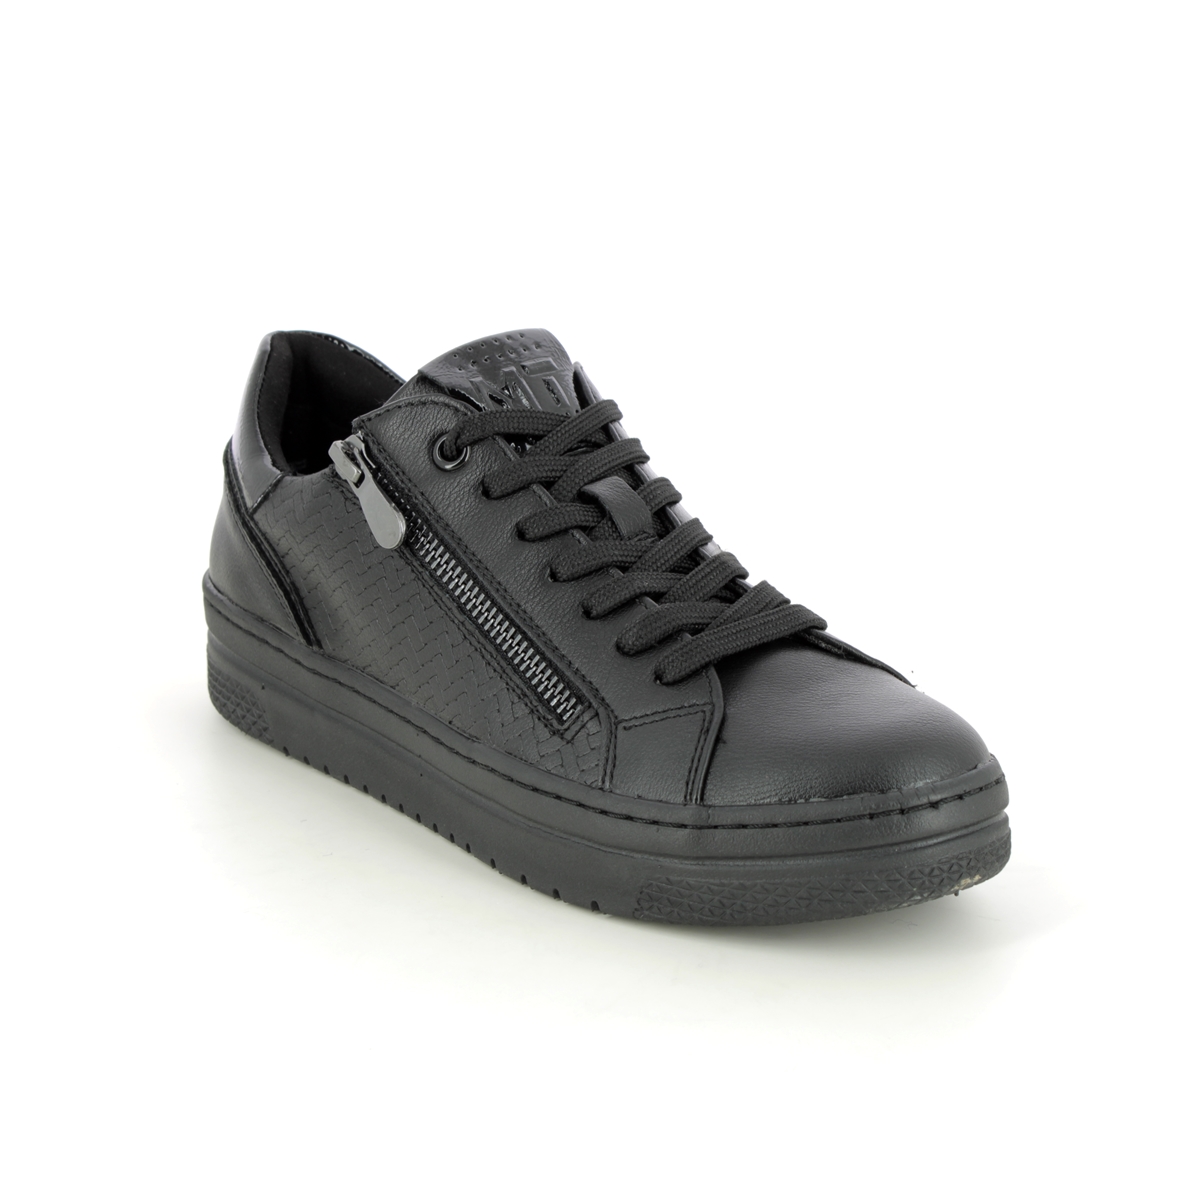 Marco Tozzi Raveen Black Womens Trainers 23709-29-098 In Size 40 In Plain Black